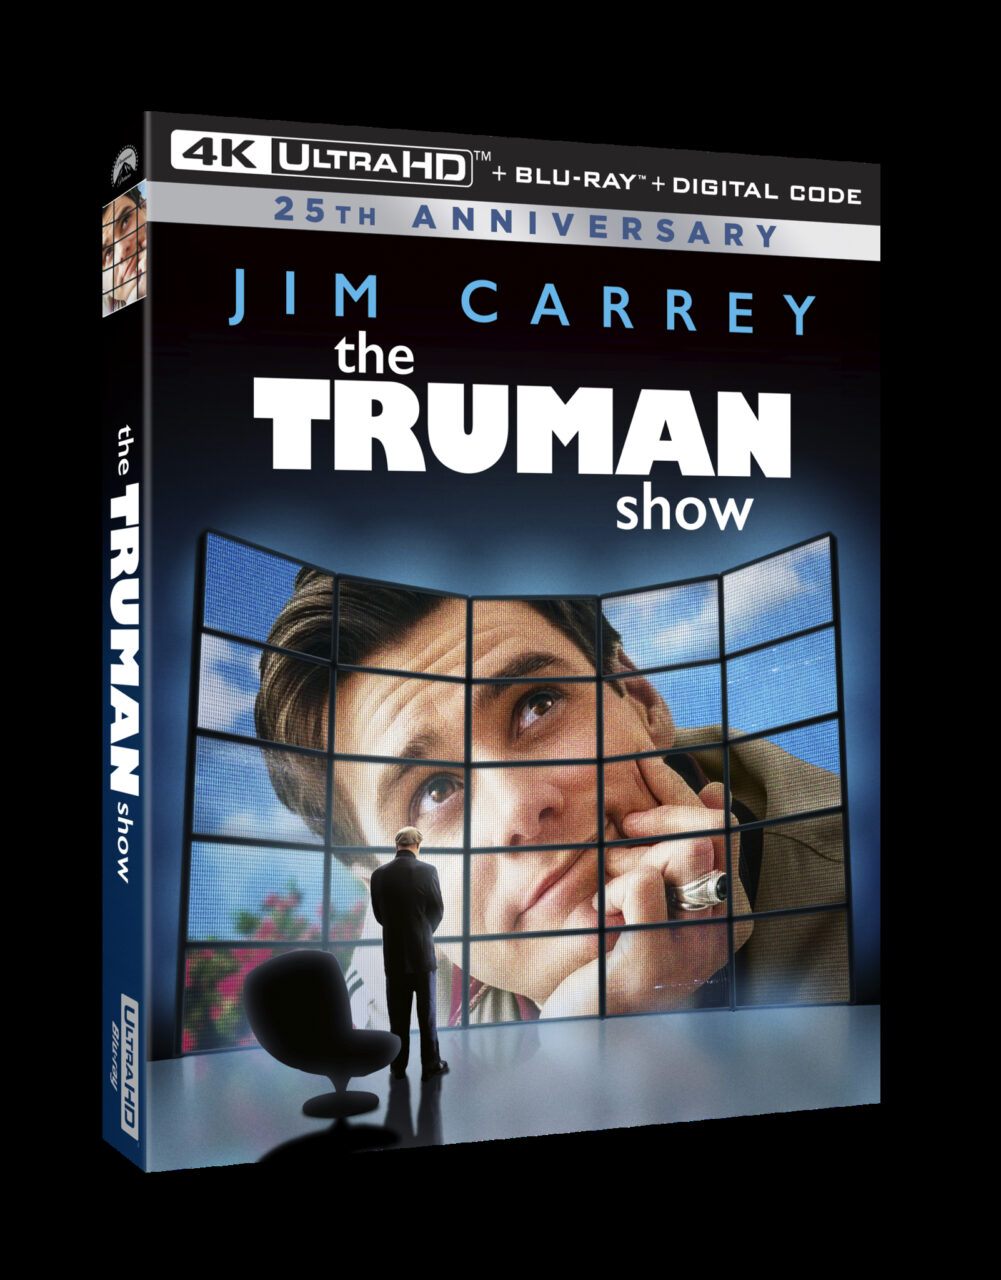 The Truman Show 4K Ultra HD Combo Pack cover (Paramount Pictures)